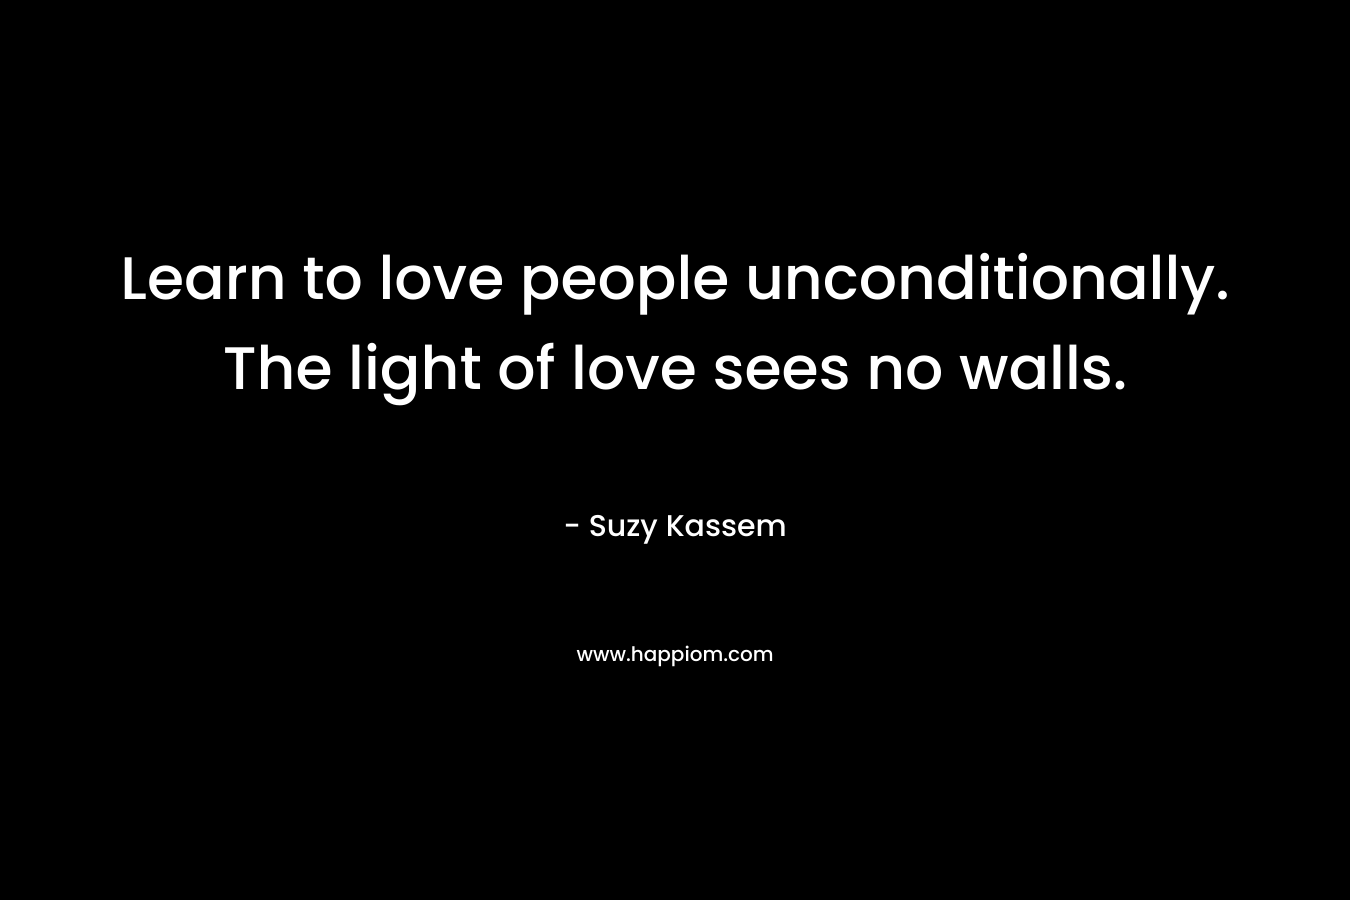 Learn to love people unconditionally. The light of love sees no walls. – Suzy Kassem